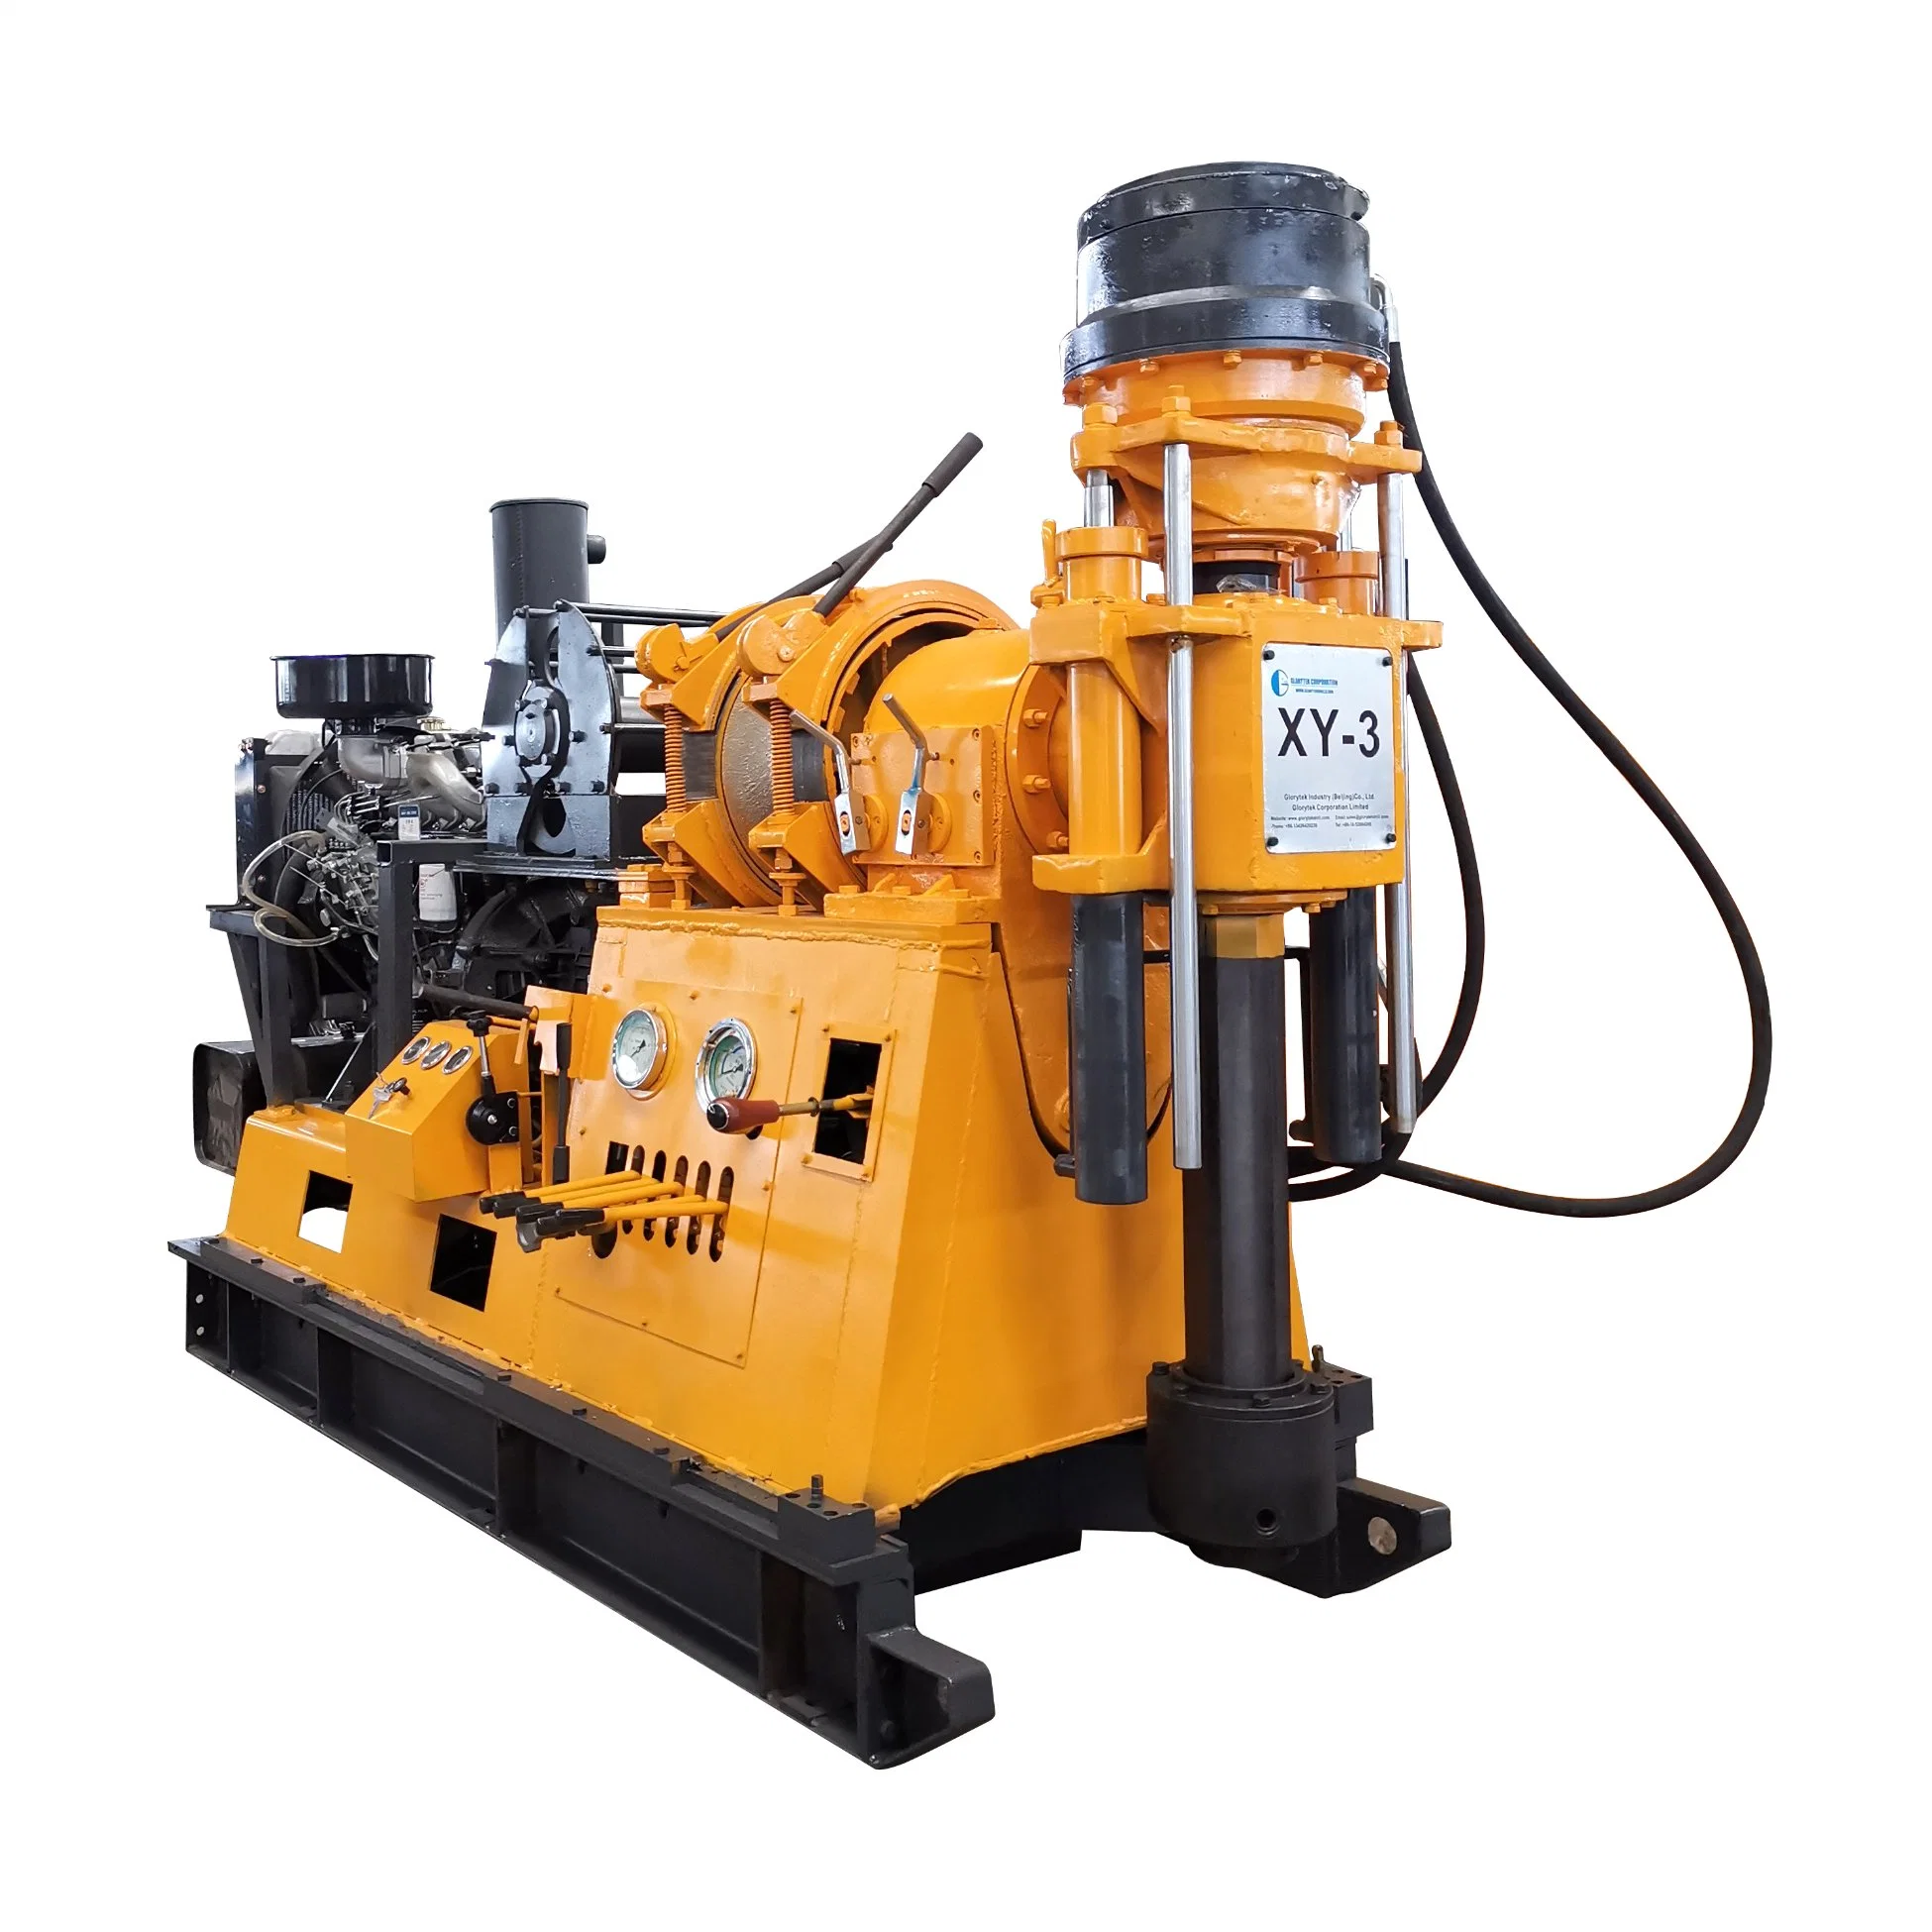 Xy-3 Core Drilling Rig Machine for Mineral Geological Exploration